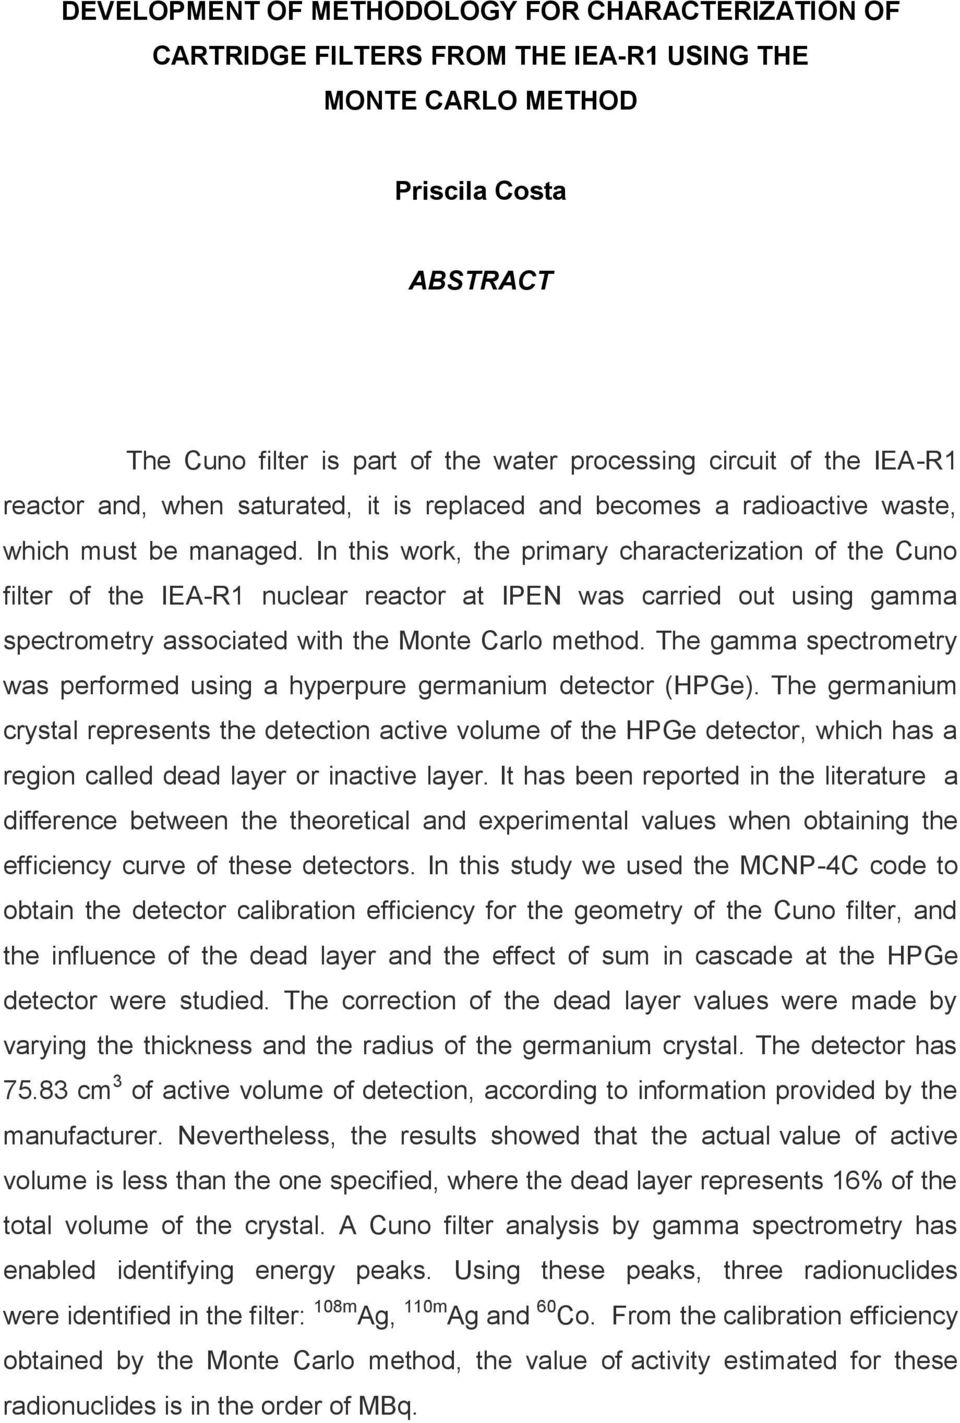 In this work, the primary characterization of the Cuno filter of the IEA-R1 nuclear reactor at IPEN was carried out using gamma spectrometry associated with the Monte Carlo method.